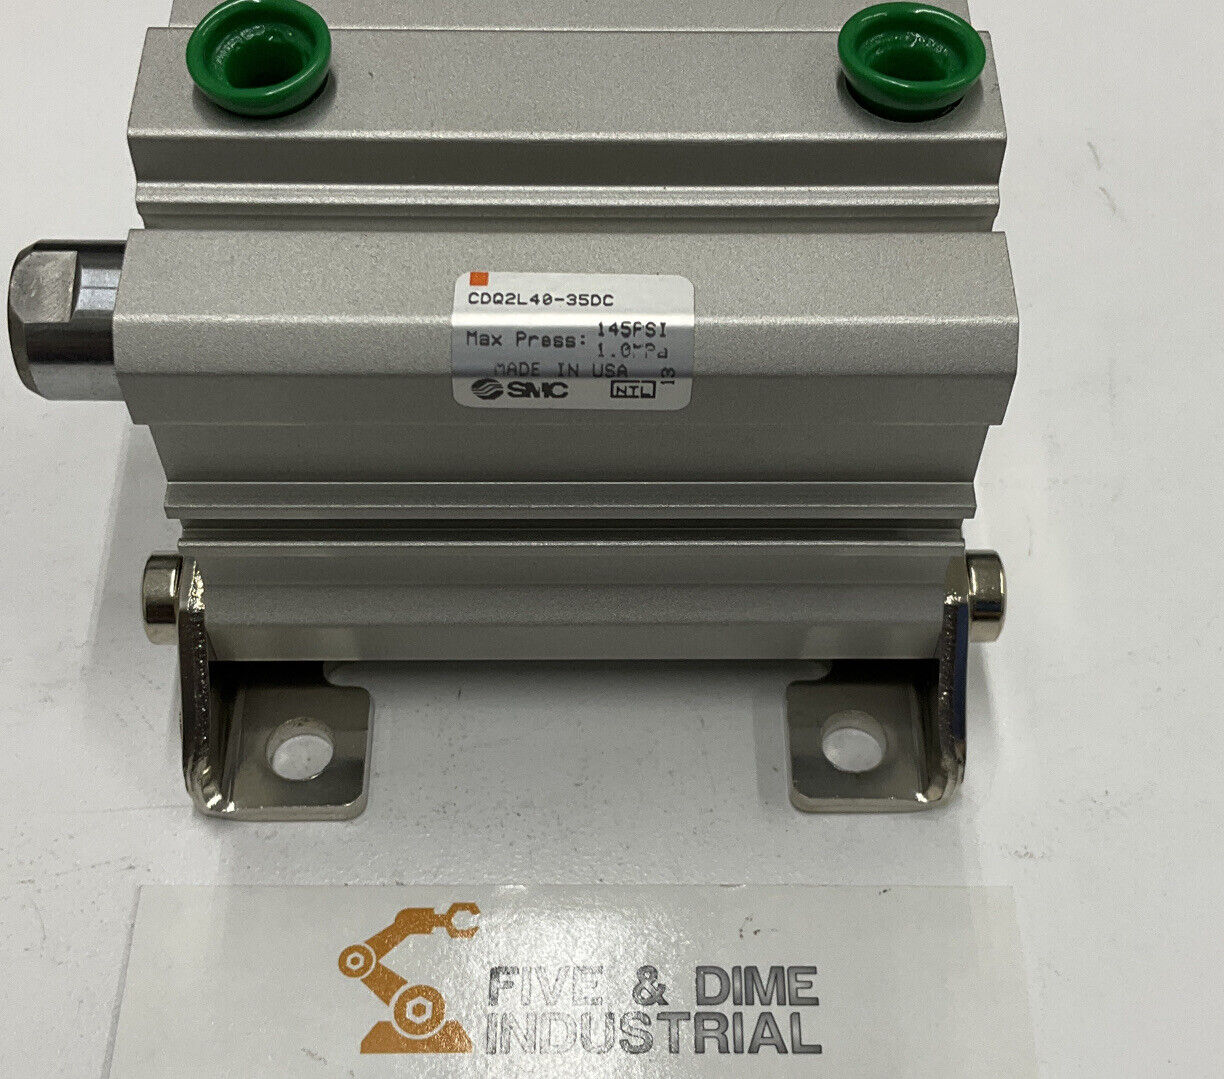 SMC CDQ2L40-35DC Pneumatic Compact Cylinder (CL158) - 0